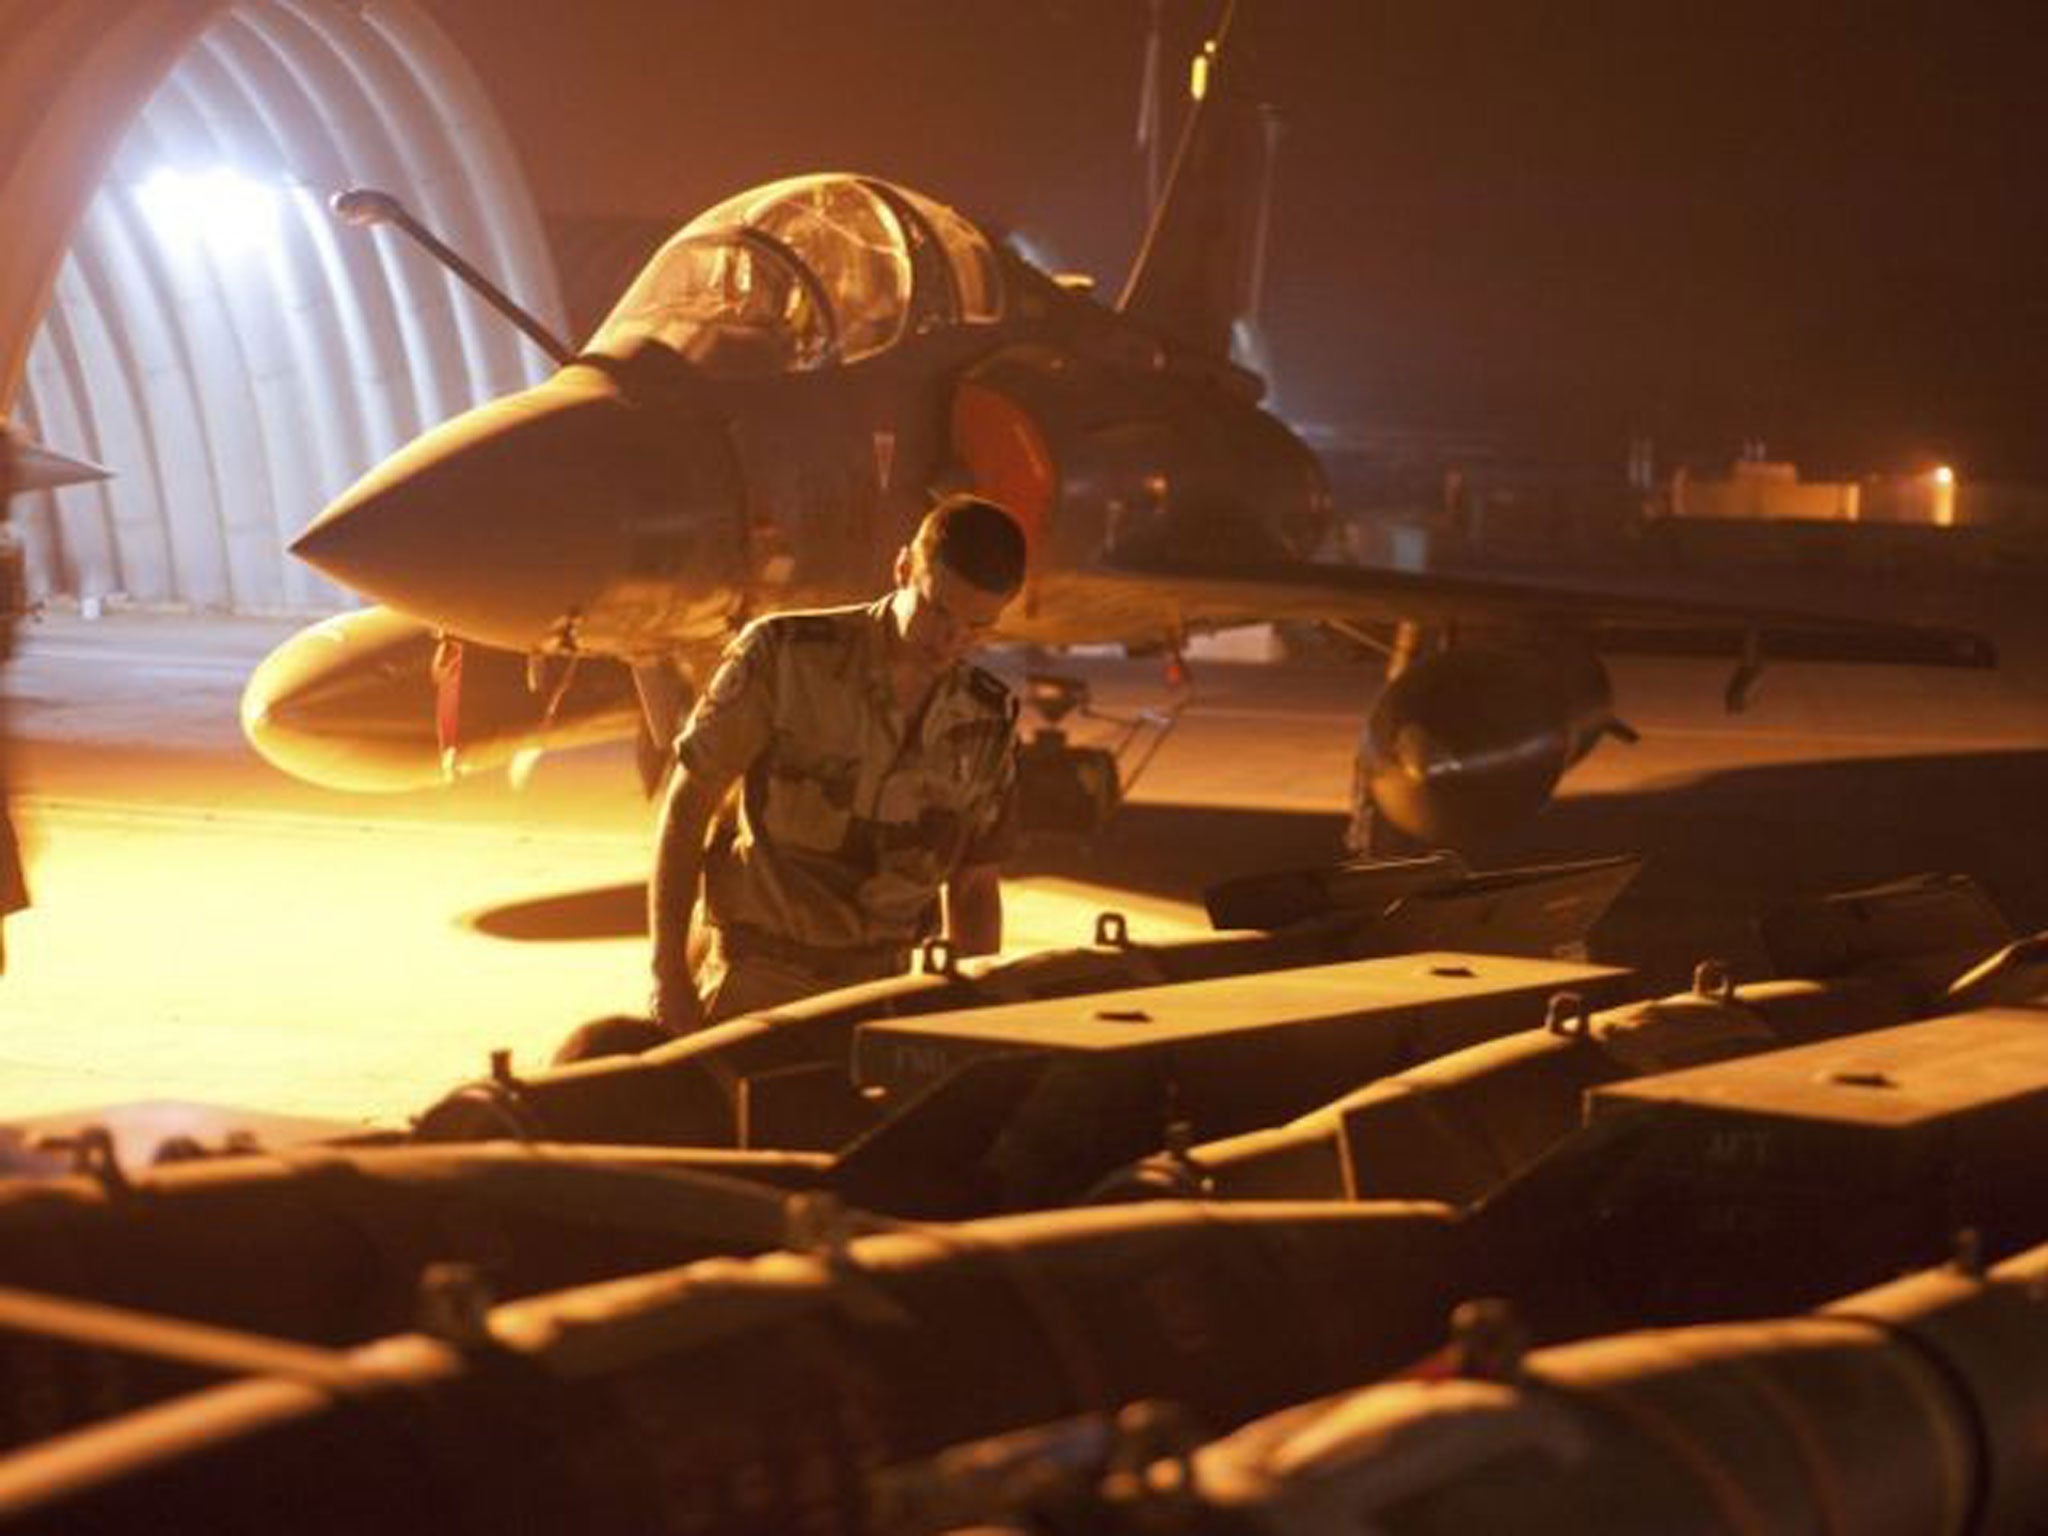 A French Mirage 2000D fighter plane is prepared for action in N’Djamena, Chad